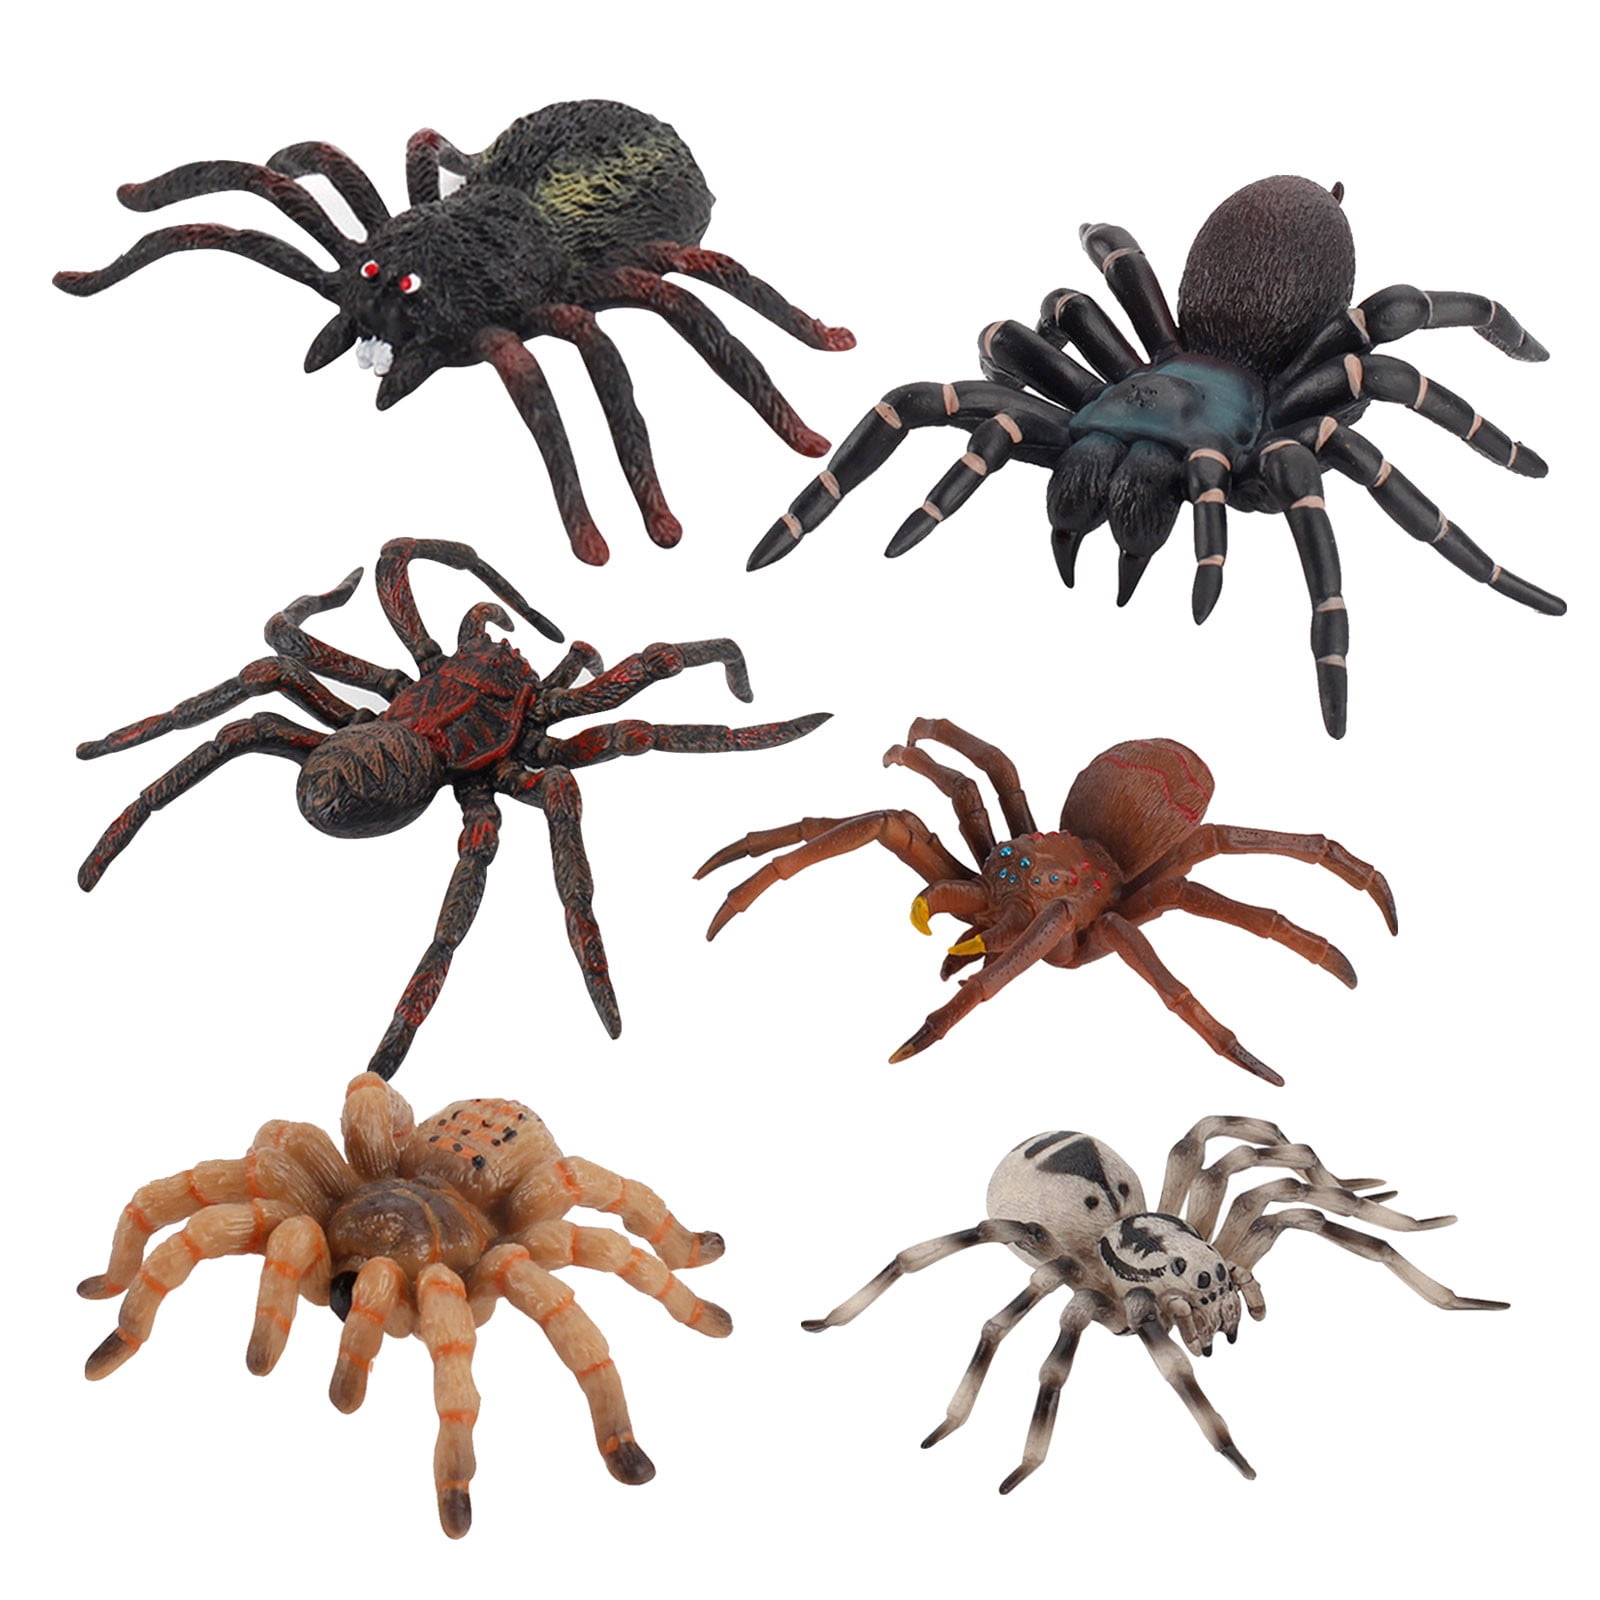 Simulated Spider Model Halloween Kids Toys Tricky Scary Prank Strange Collection